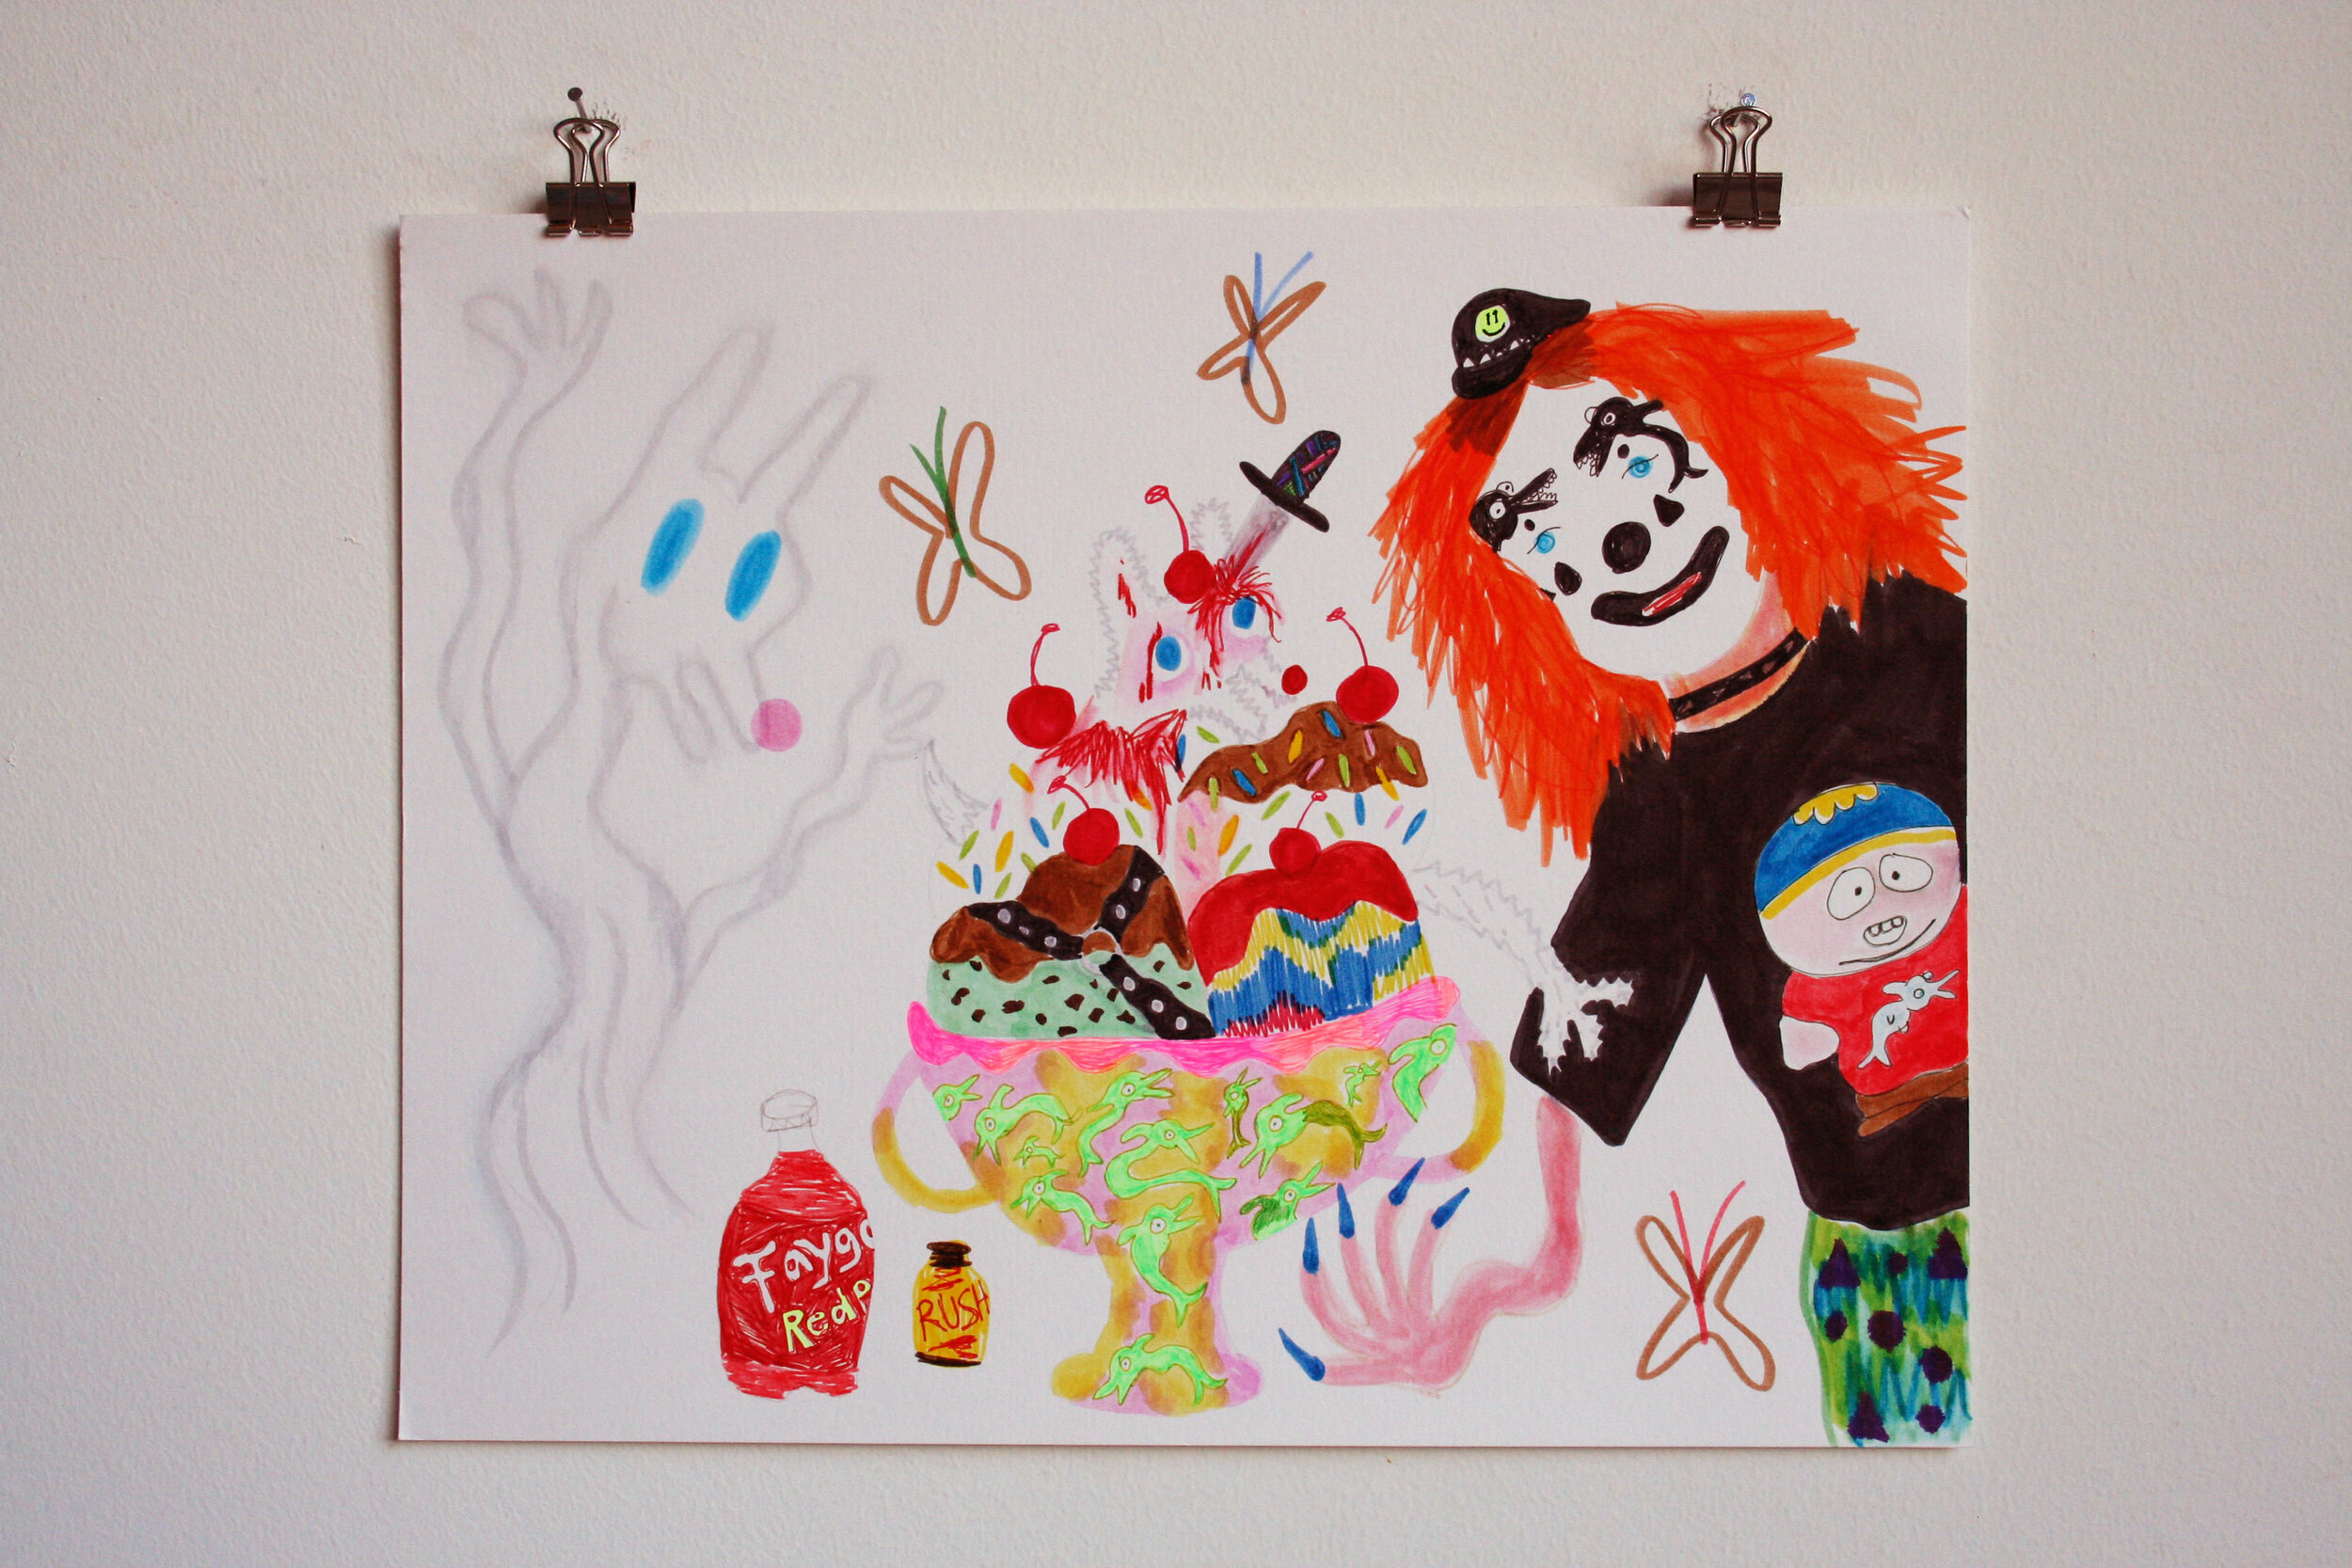   Dining with Ghost Dog,  2015  11 x 14 inches (27.94 x 35.56 cm.)  Marker on paper 